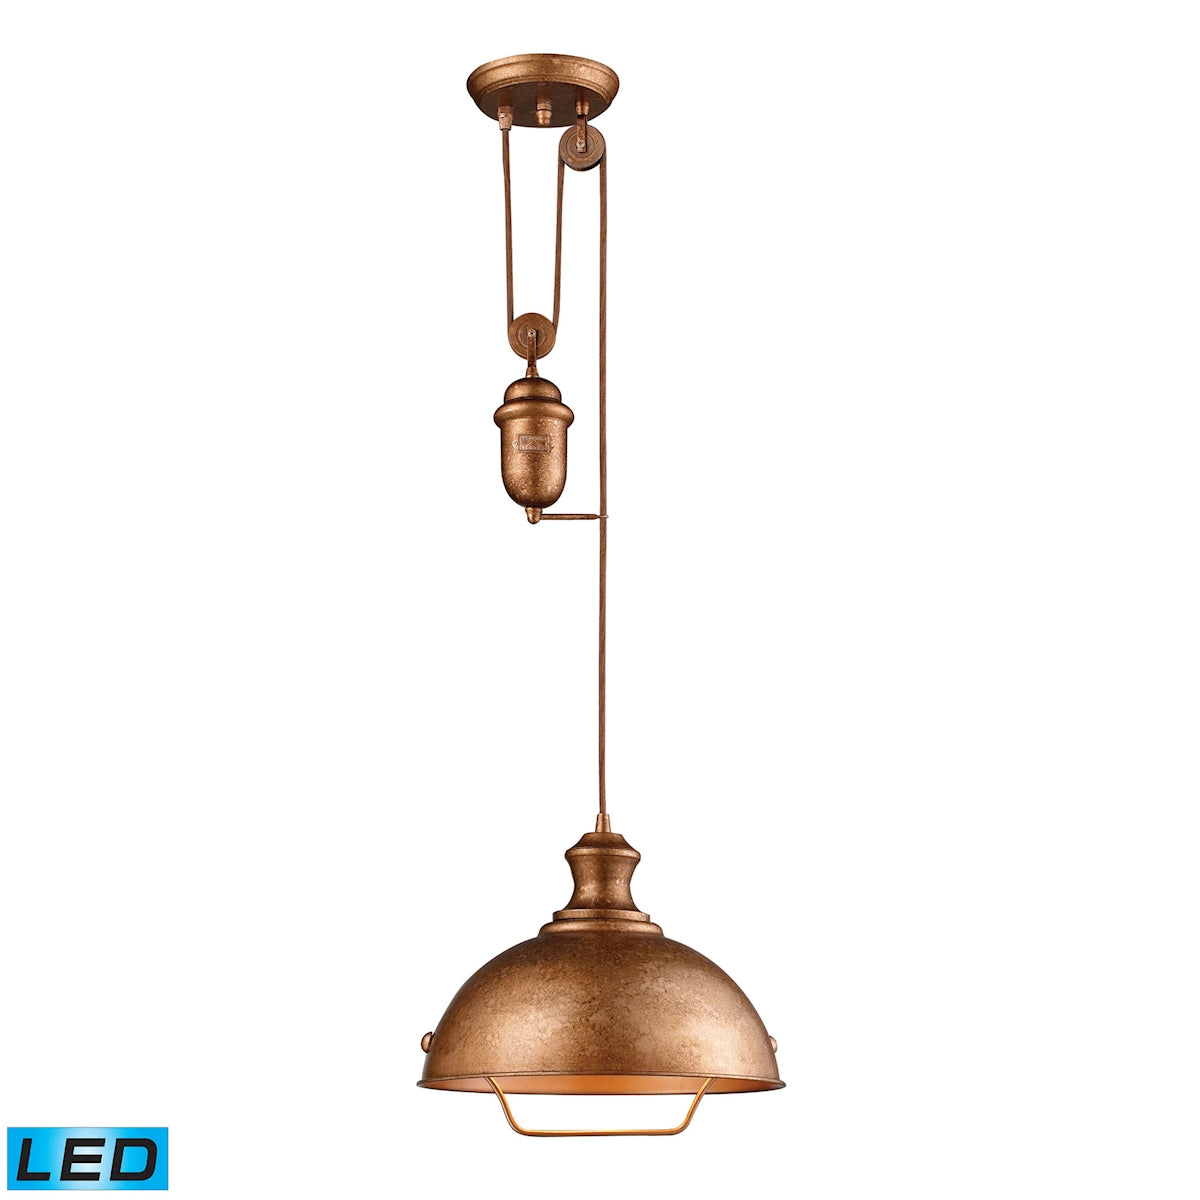 ELK Lighting 65061-1-LED Farmhouse 1-Light Adjustable Pendant in Bellwether Copper with Matching Shade - Includes LED Bulb